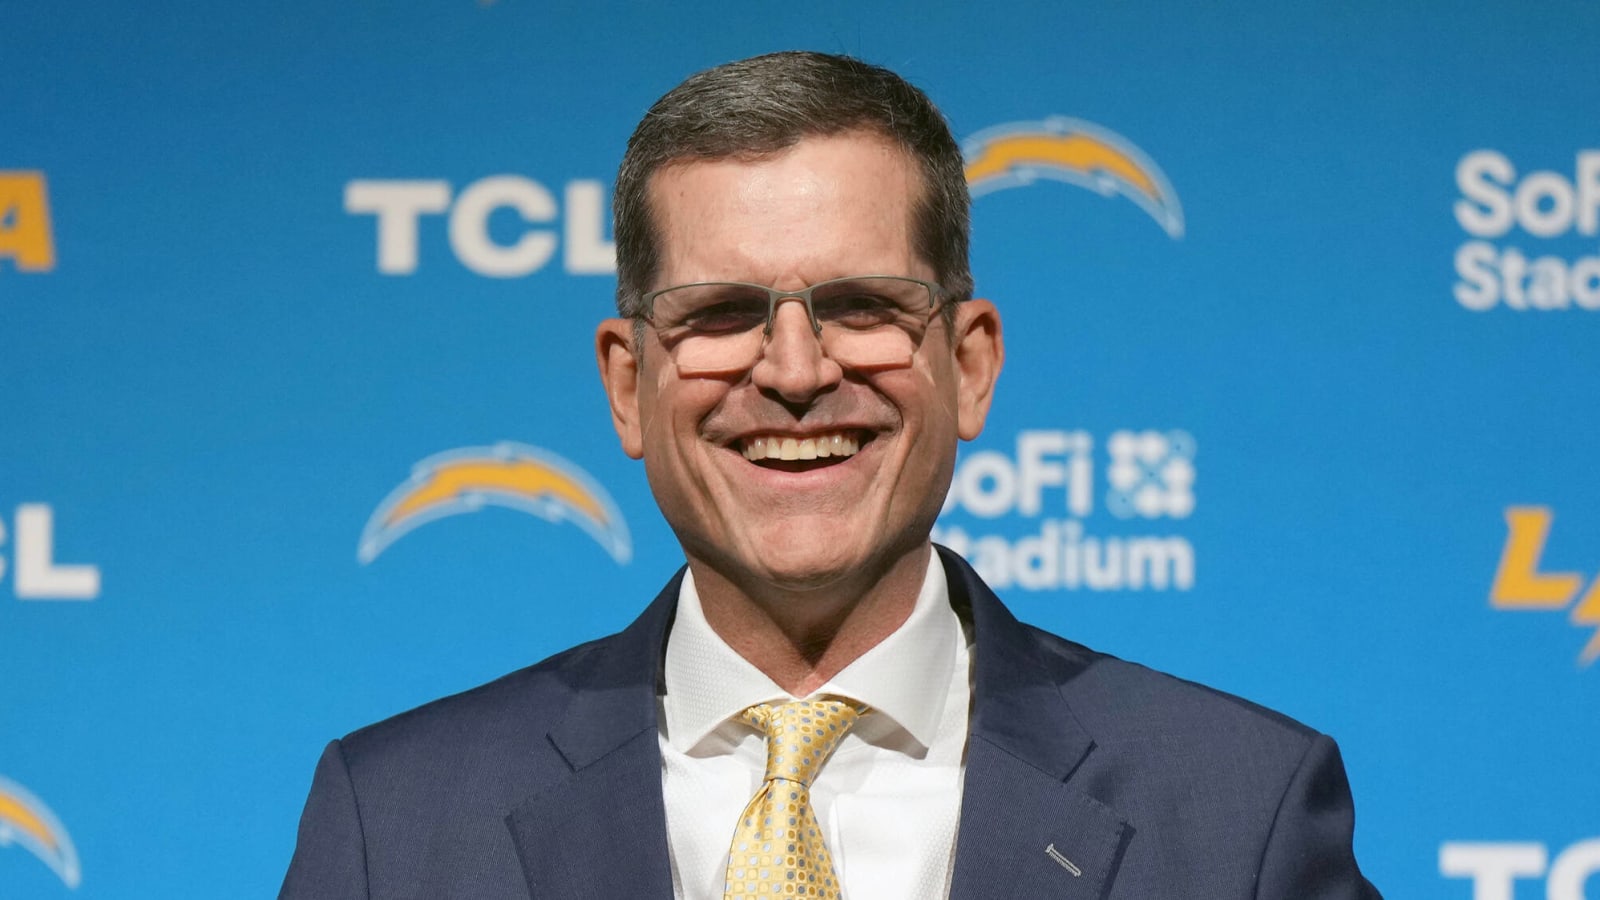 AFC Notes: Jim Harbaugh, MVS, Aidan O’Connell, Chargers, Chiefs, Raiders